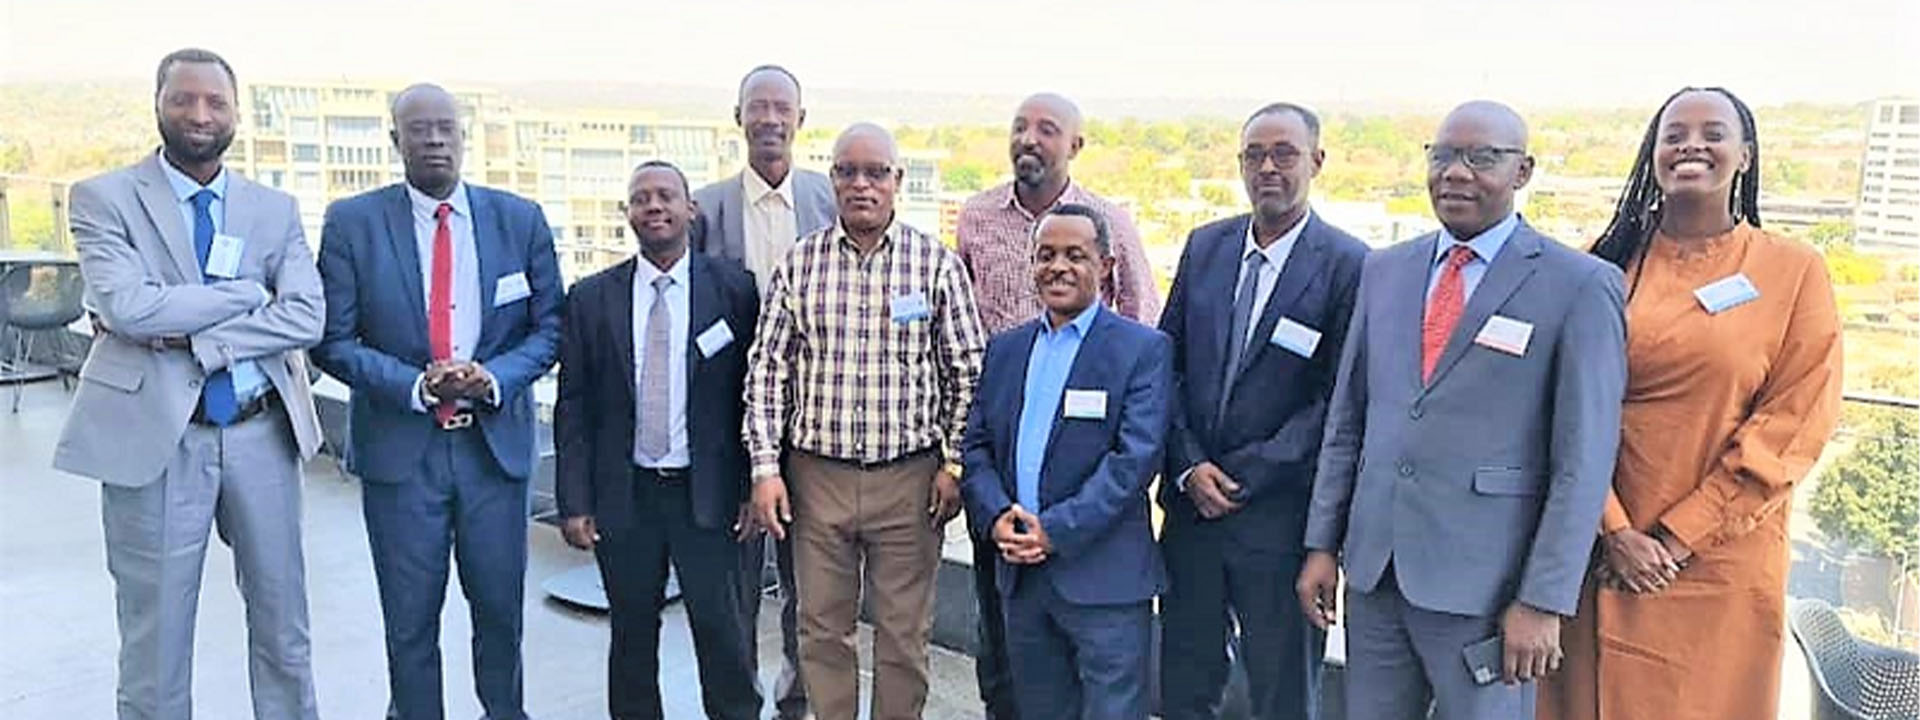 IGAD in the List of Speakers at the Second ACQF Training Program